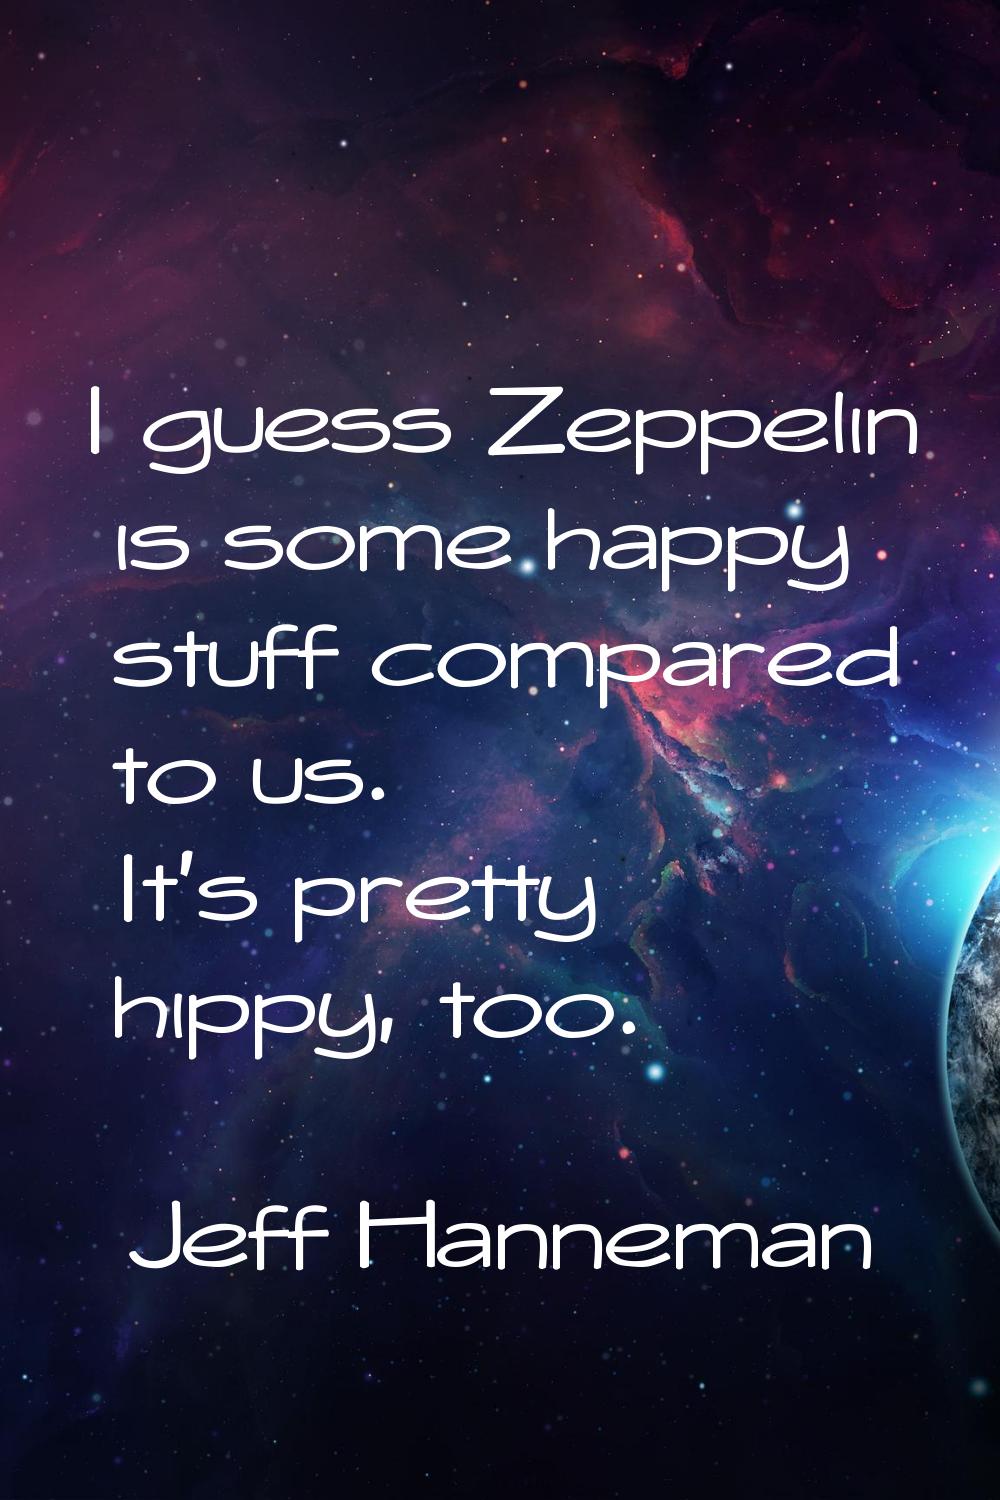 I guess Zeppelin is some happy stuff compared to us. It's pretty hippy, too.